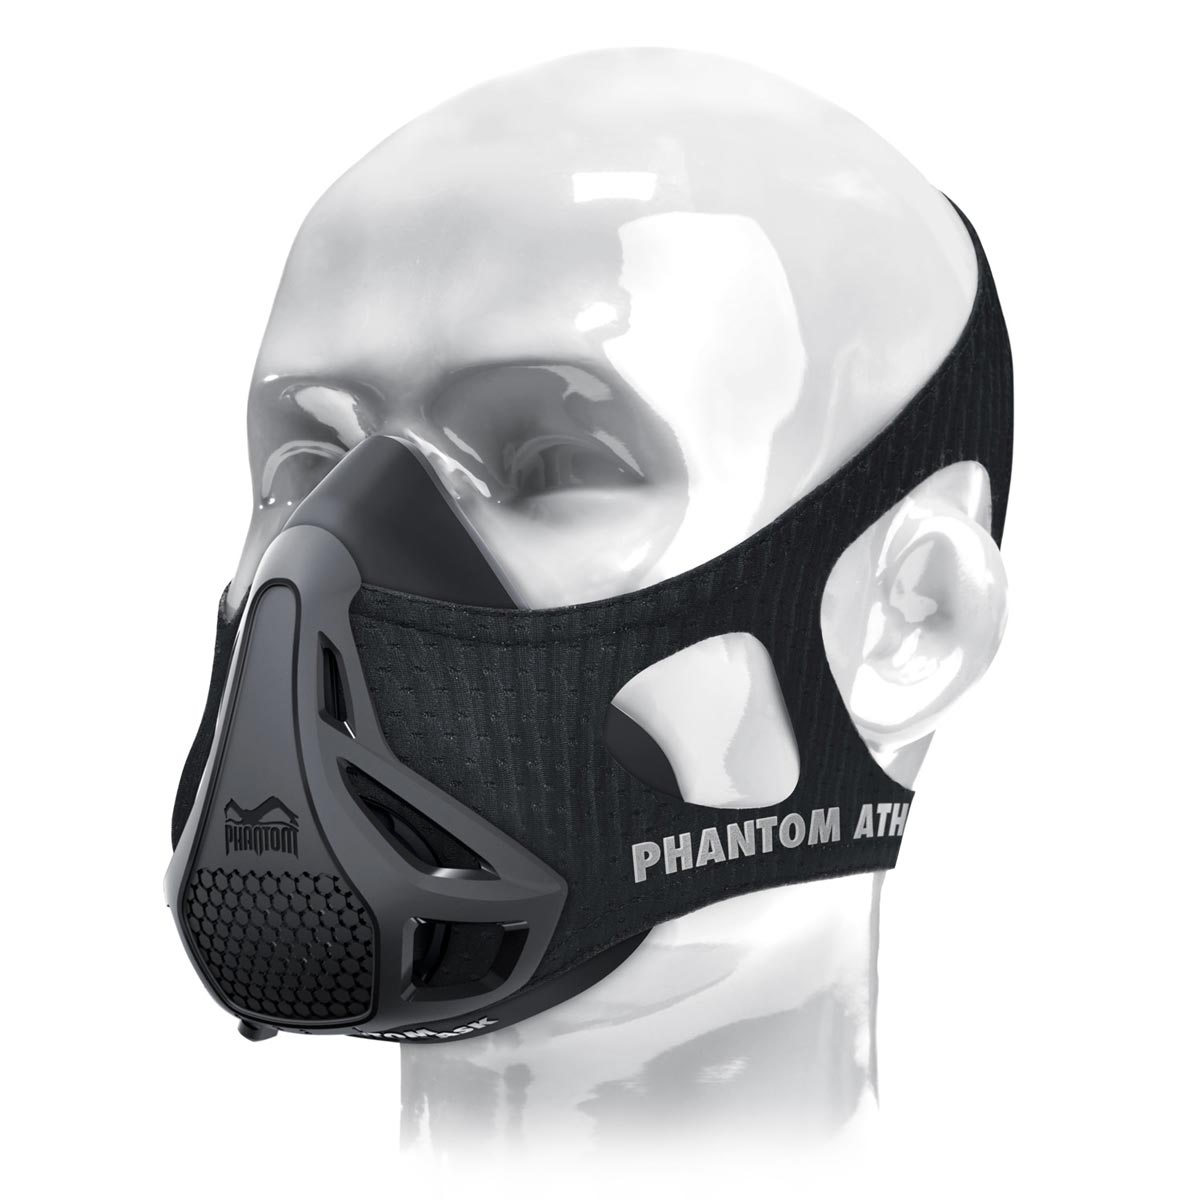 The Phantom training mask. The original. Patented and awarded to take your fitness to the next level.